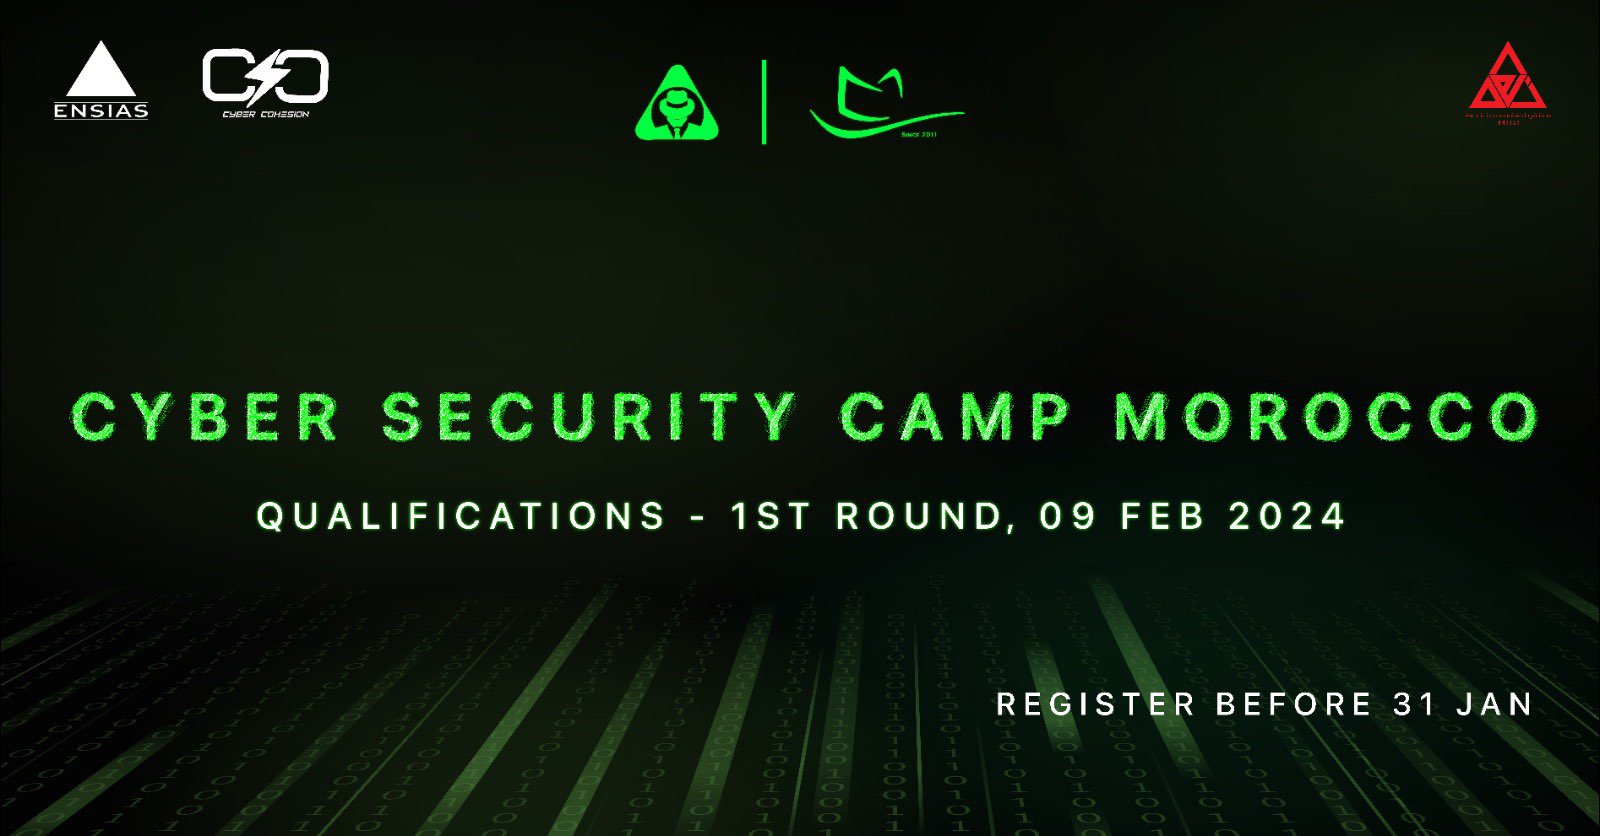 MOROCCAN CYBER SECURITY CAMP V11.0 - Qualifications-img-cover